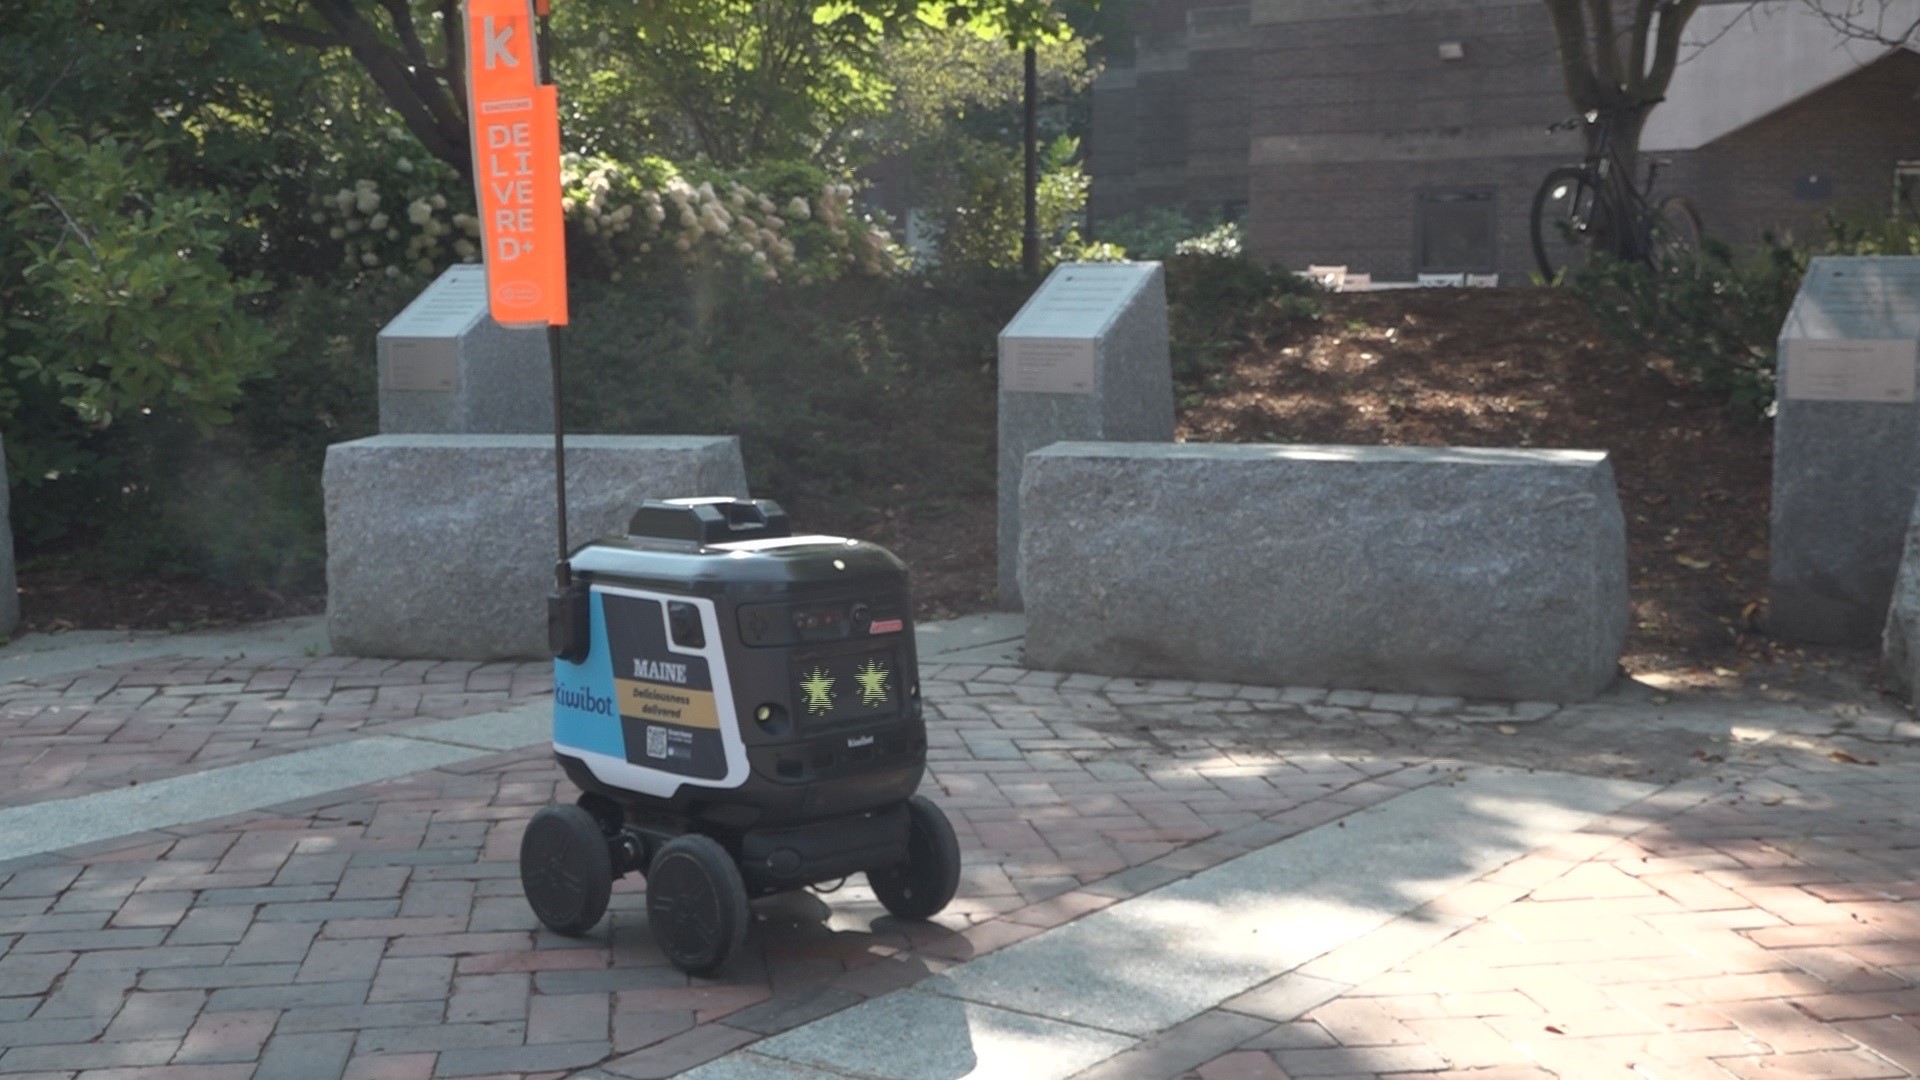 The Kiwibots are the campus food delivery solution.